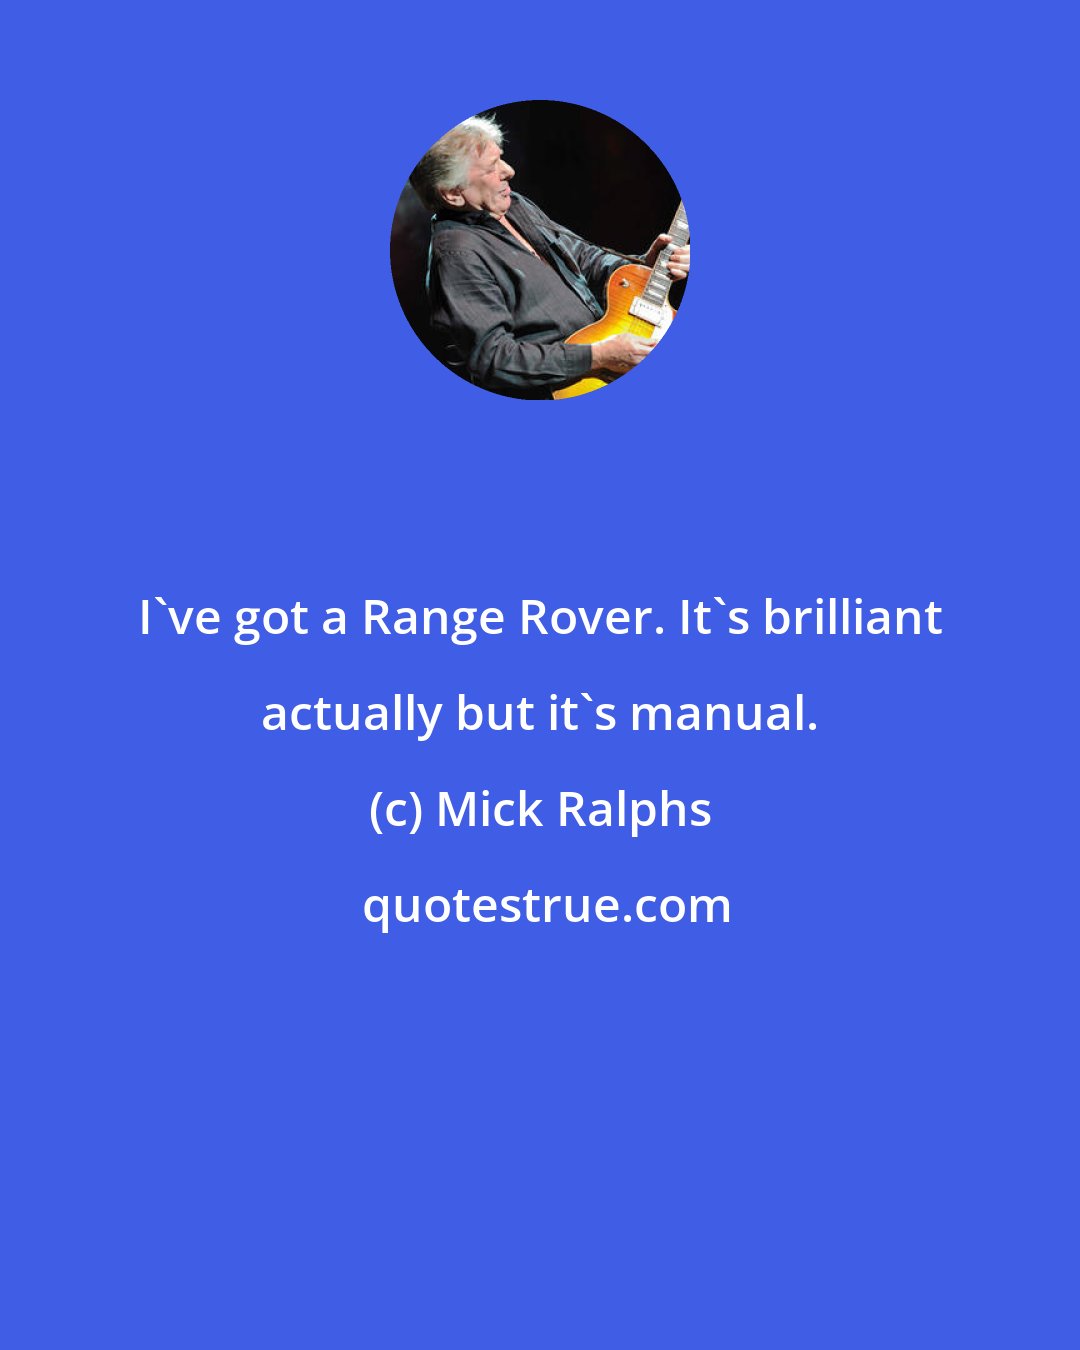 Mick Ralphs: I've got a Range Rover. It's brilliant actually but it's manual.